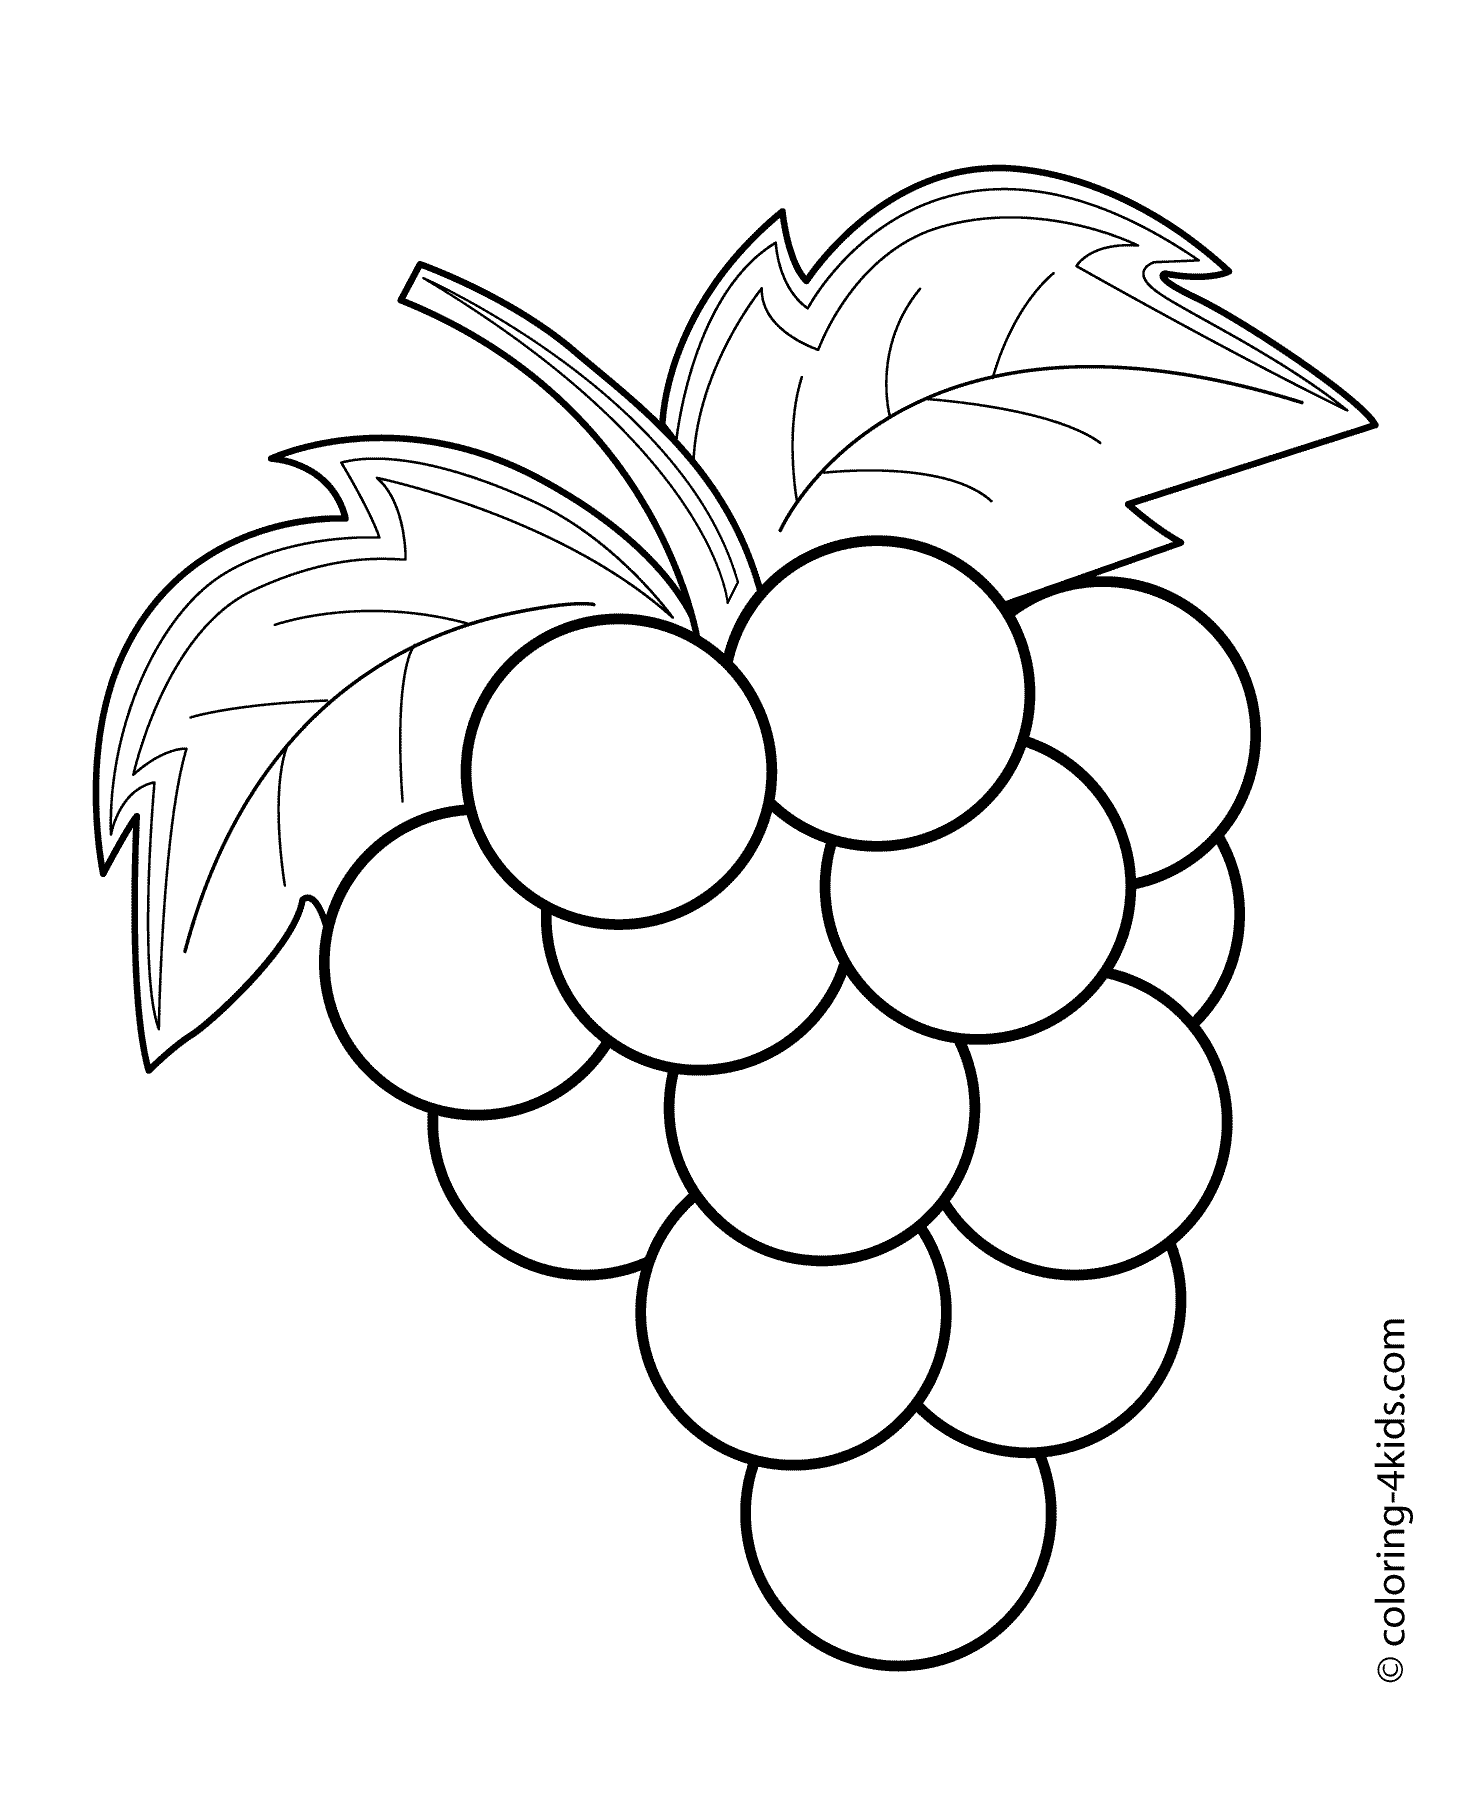 Grapes fruits and berries coloring pages for kids, printable